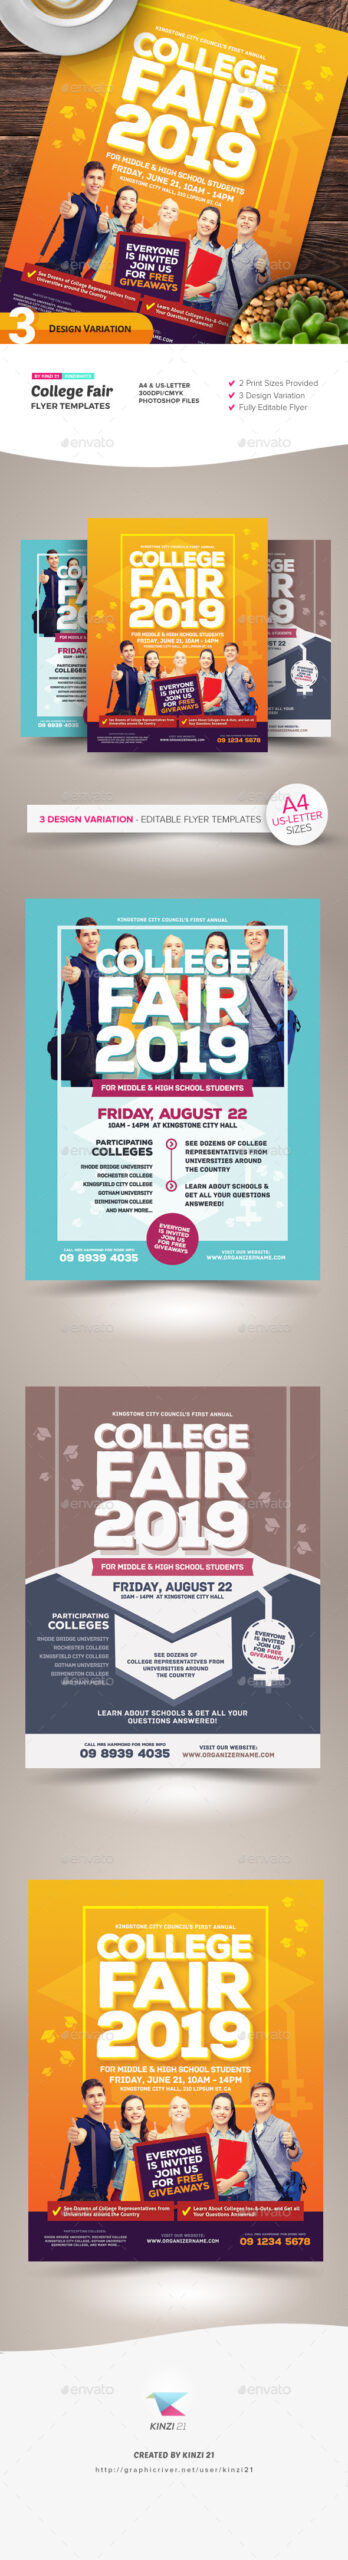 Photo College Flyer Templates from GraphicRiver Regarding College Fair Flyer Template Regarding College Fair Flyer Template